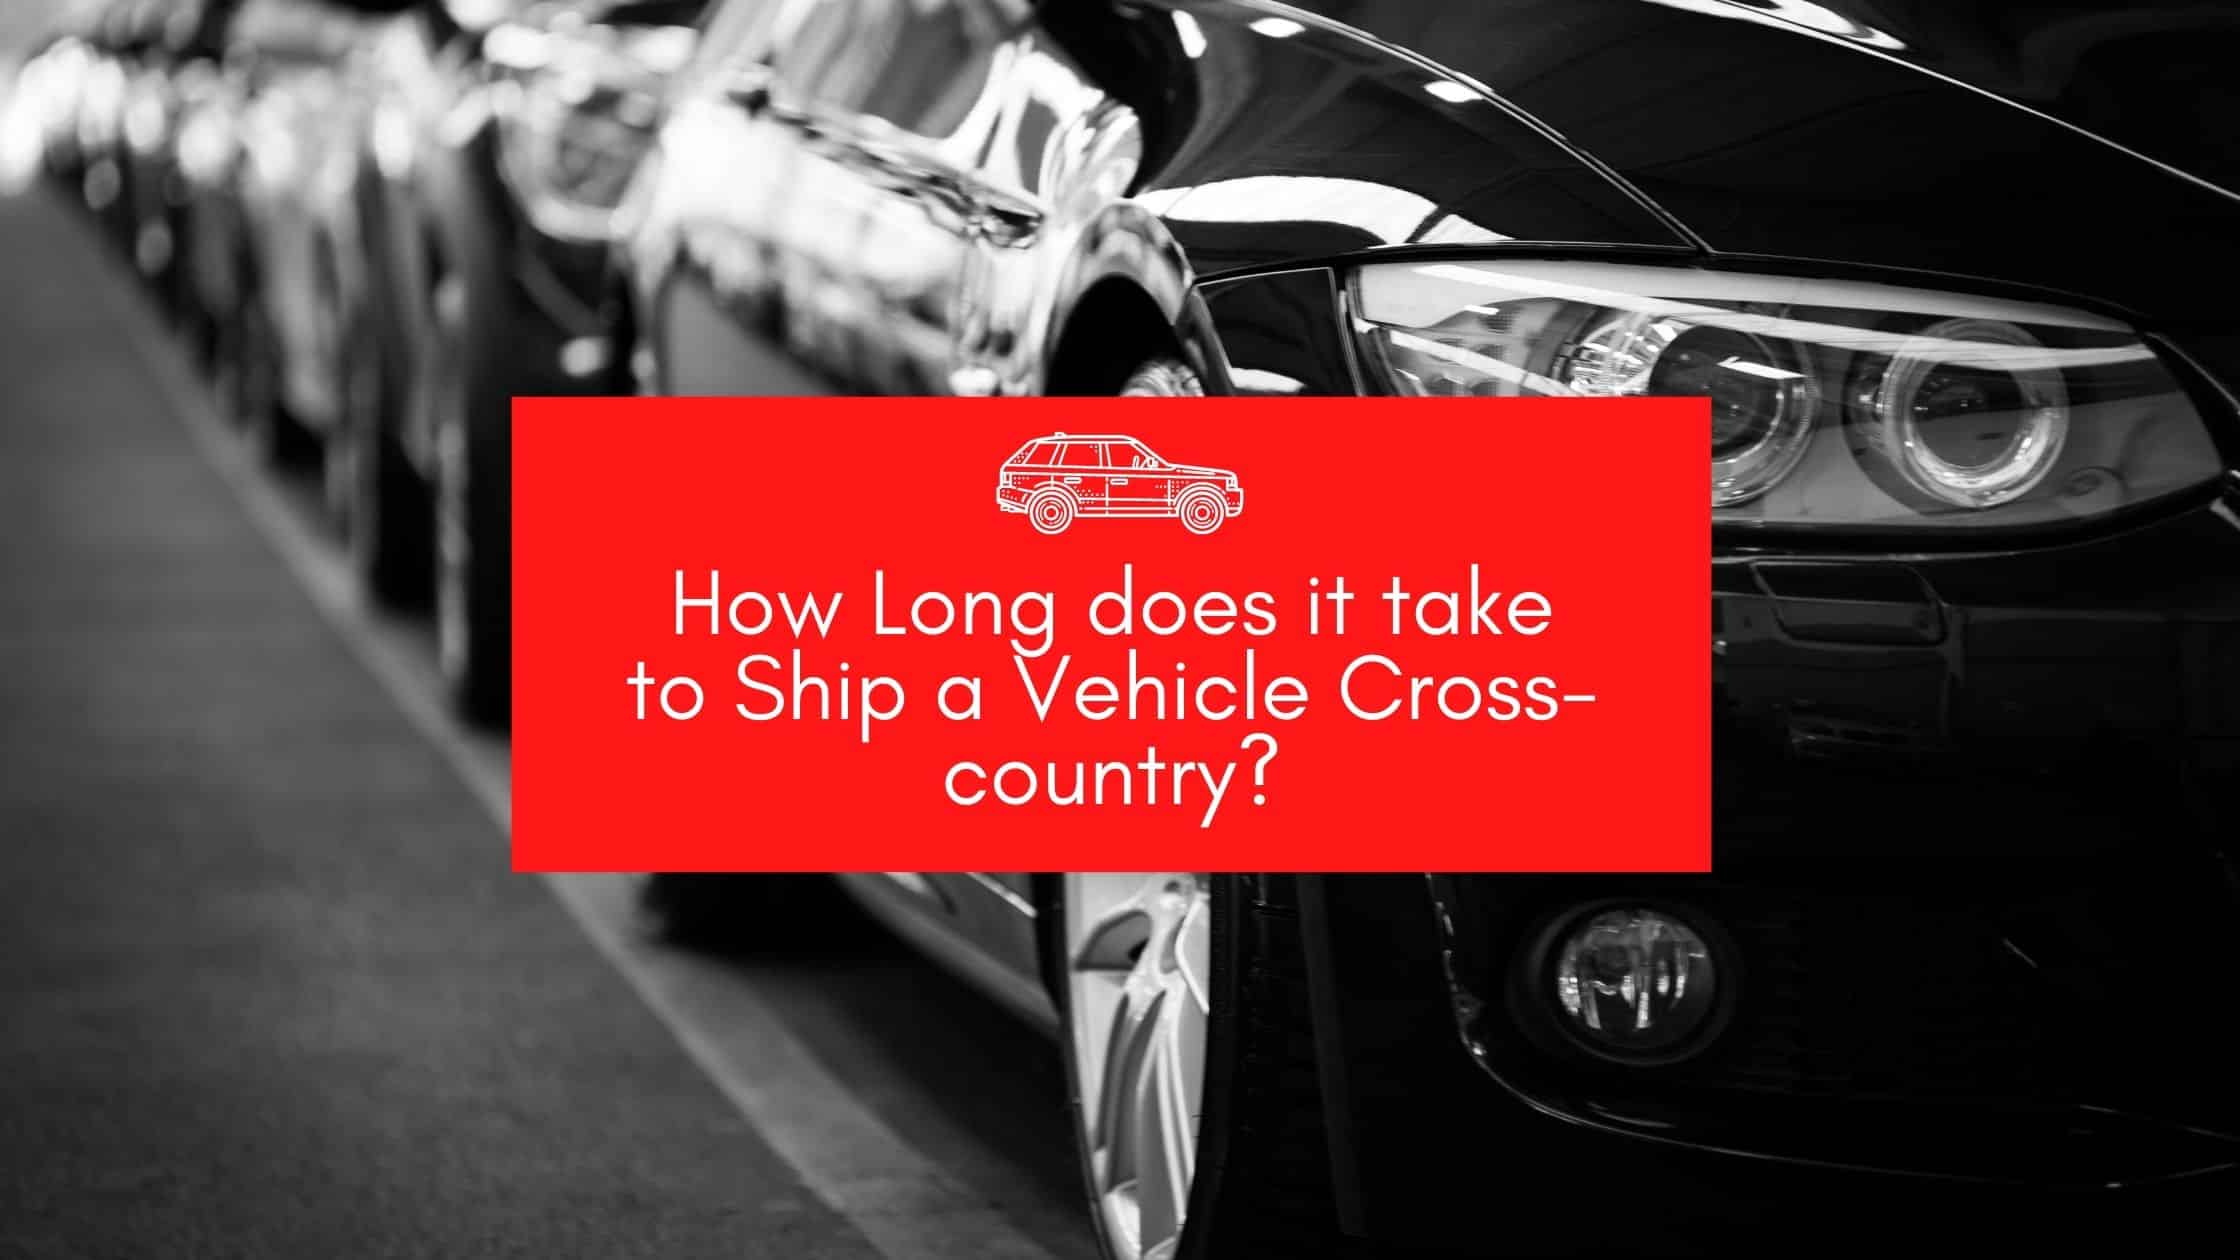 How Long does it take to Ship a Vehicle Cross-country?